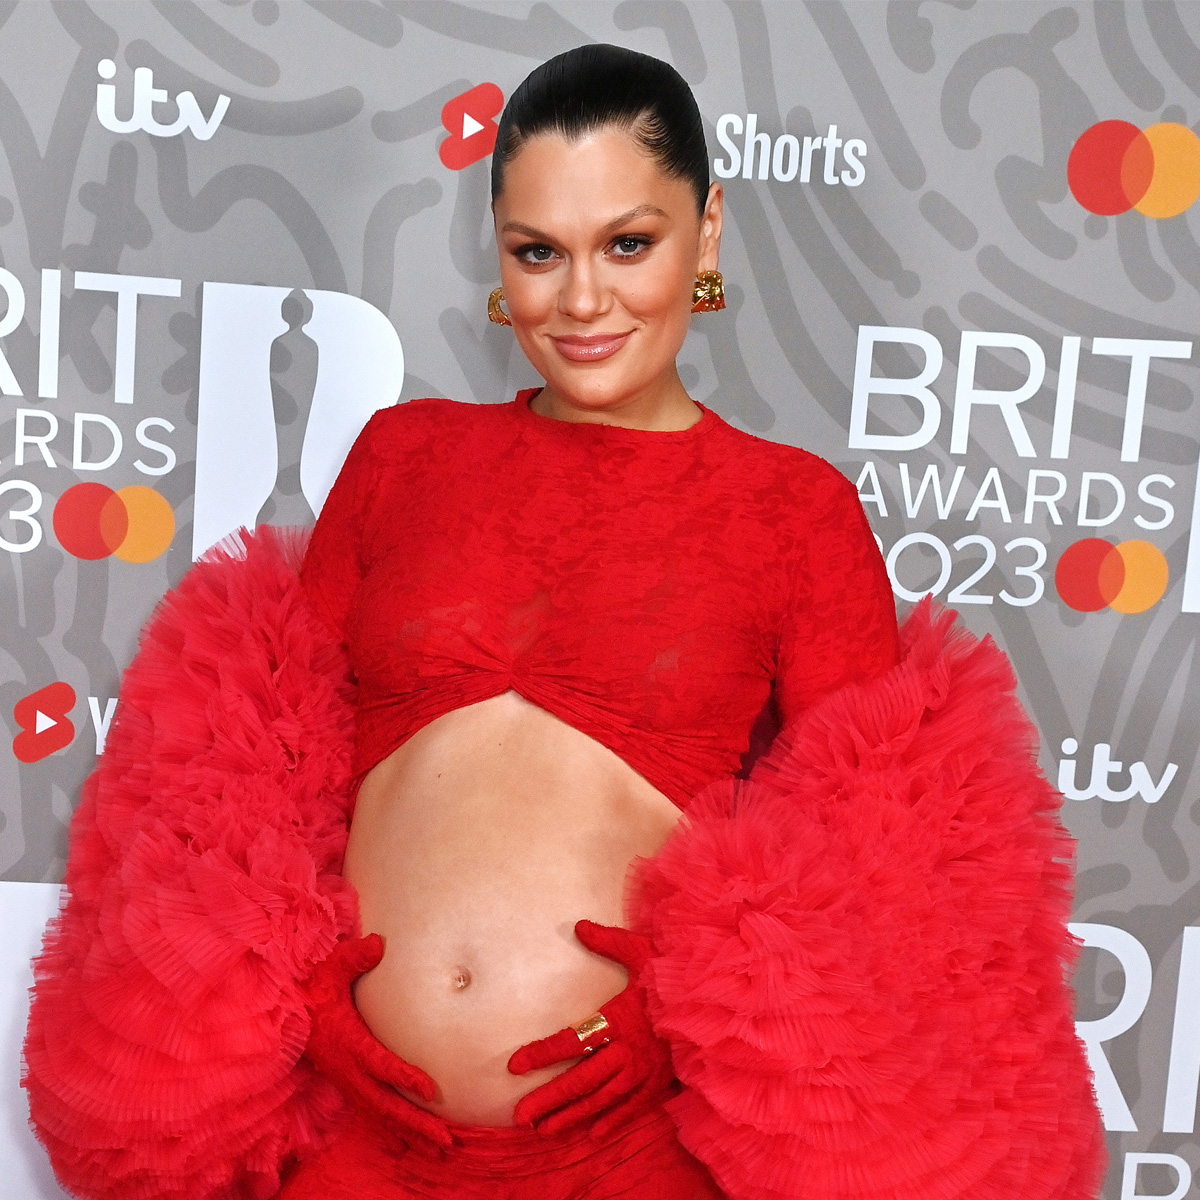 Pregnant Jessie J Reveals Sex of Her Baby Before Baring Bump at BRITs